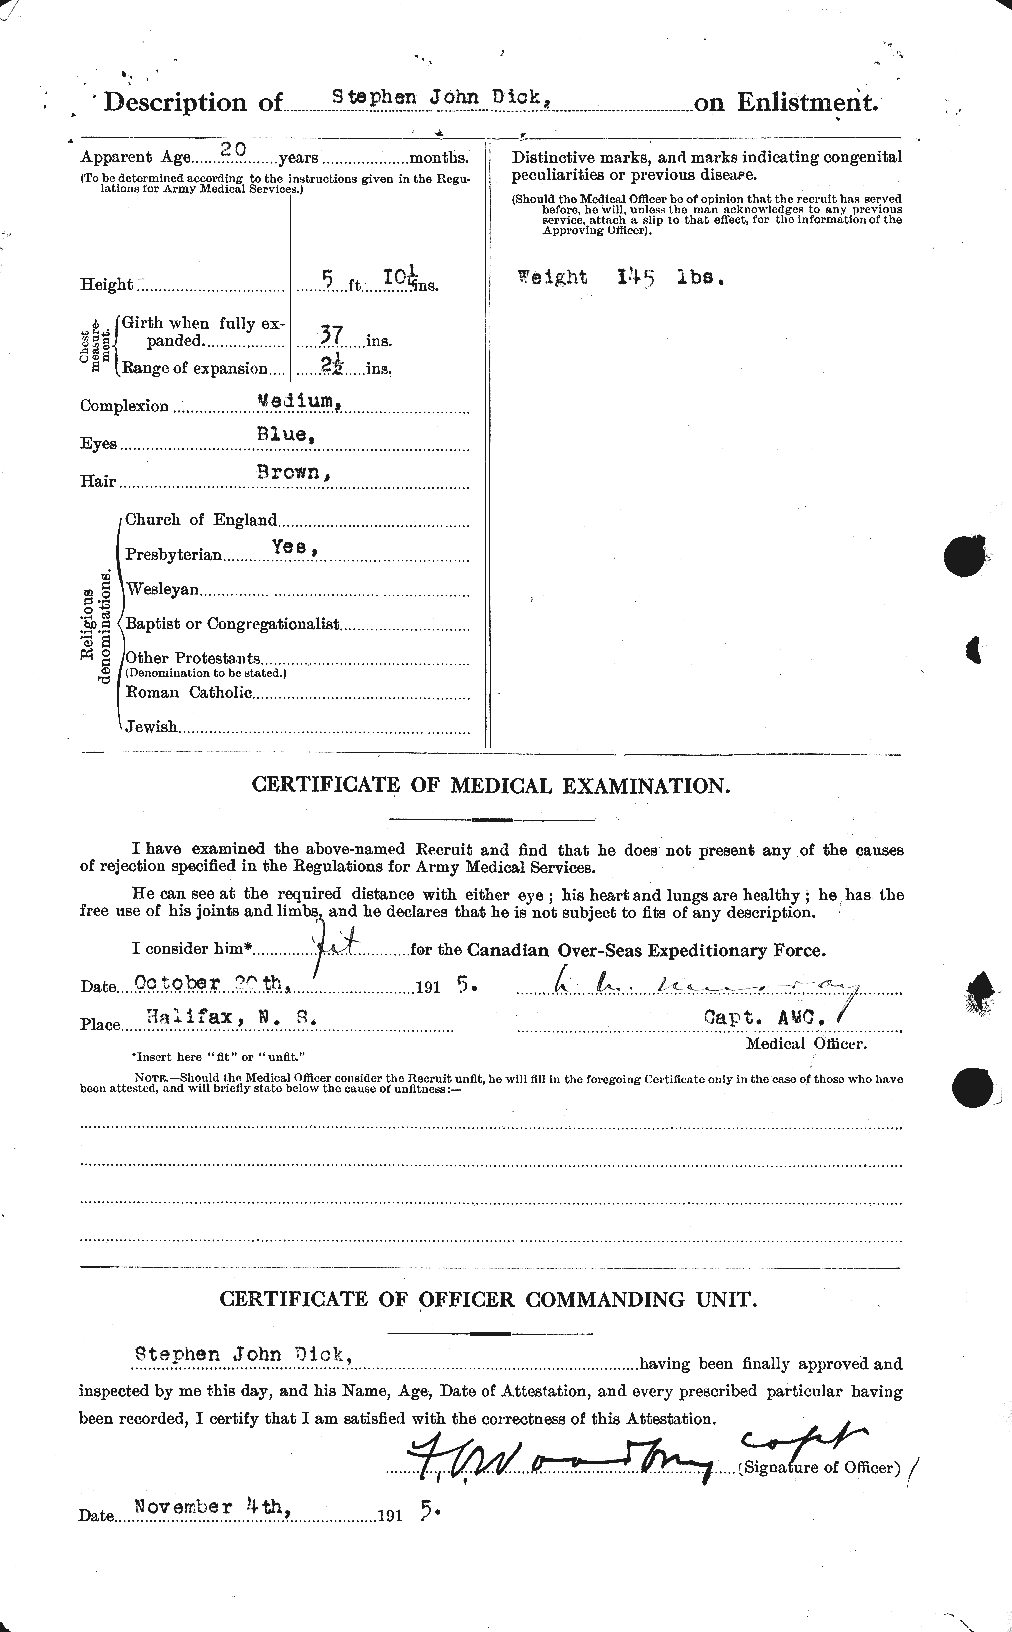 Personnel Records of the First World War - CEF 290560b